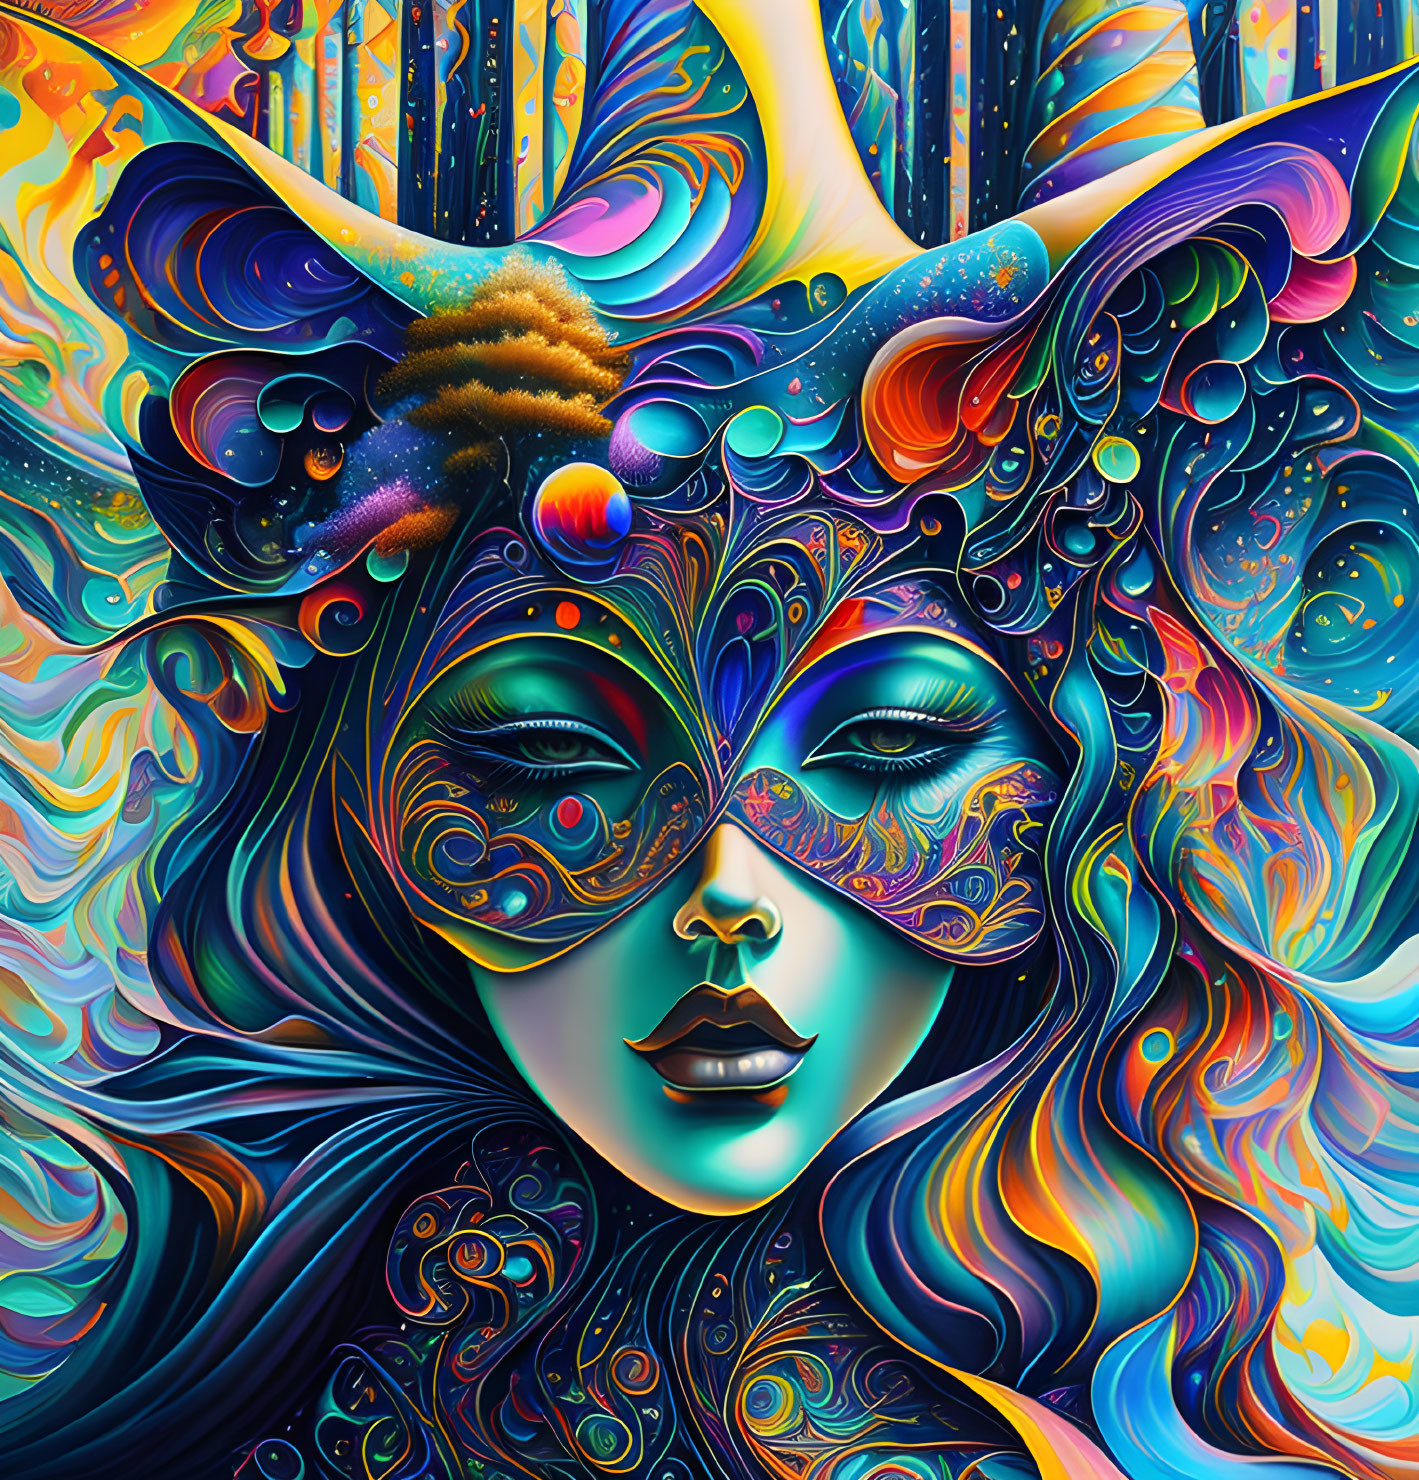 Vibrant psychedelic portrait of a woman with feline features